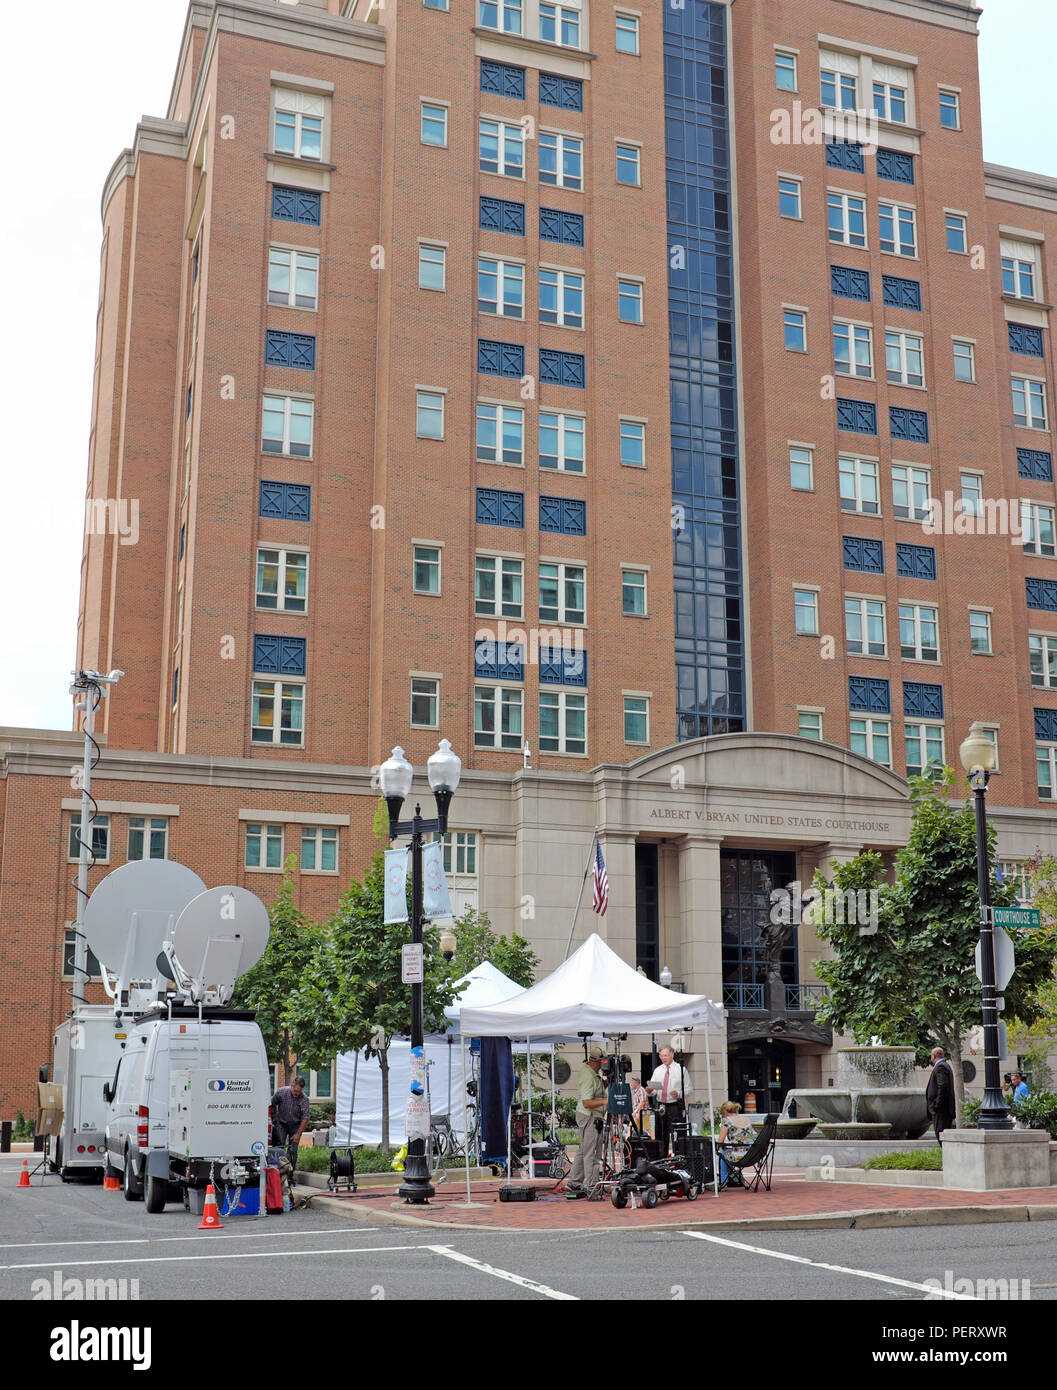 Broadcast media outside the Albert V. Bryan United States Courthouse in Alexandria, Virginia covering the Paul Manfort trial occurring inside. Stock Photo